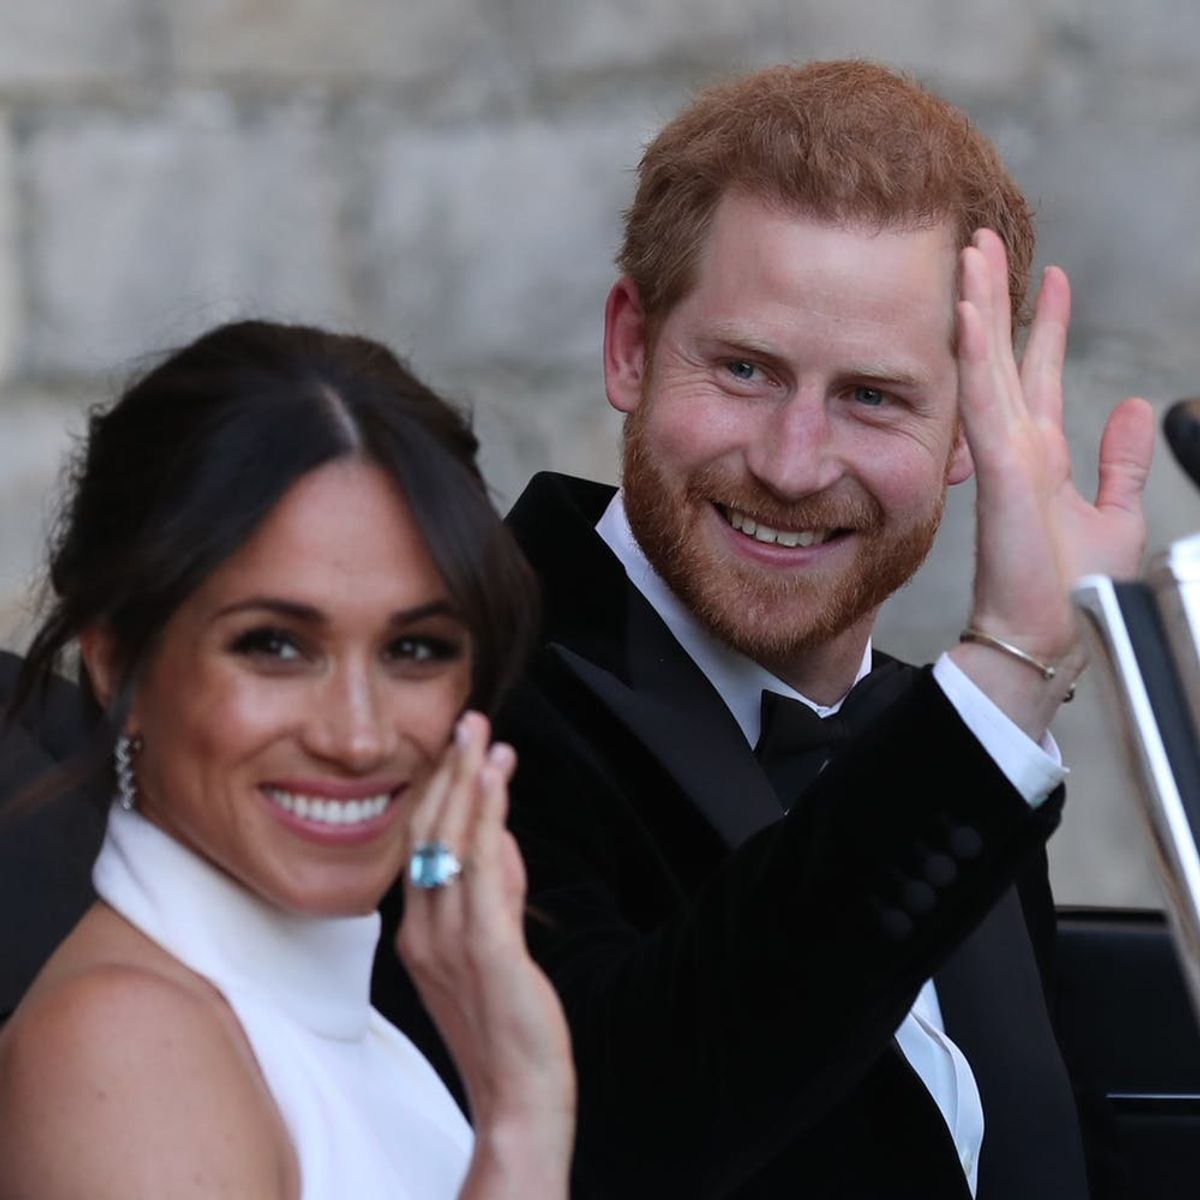 BREAKING: Meghan Markle Debuts Her Second Jaw-Dropping Wedding Dress!